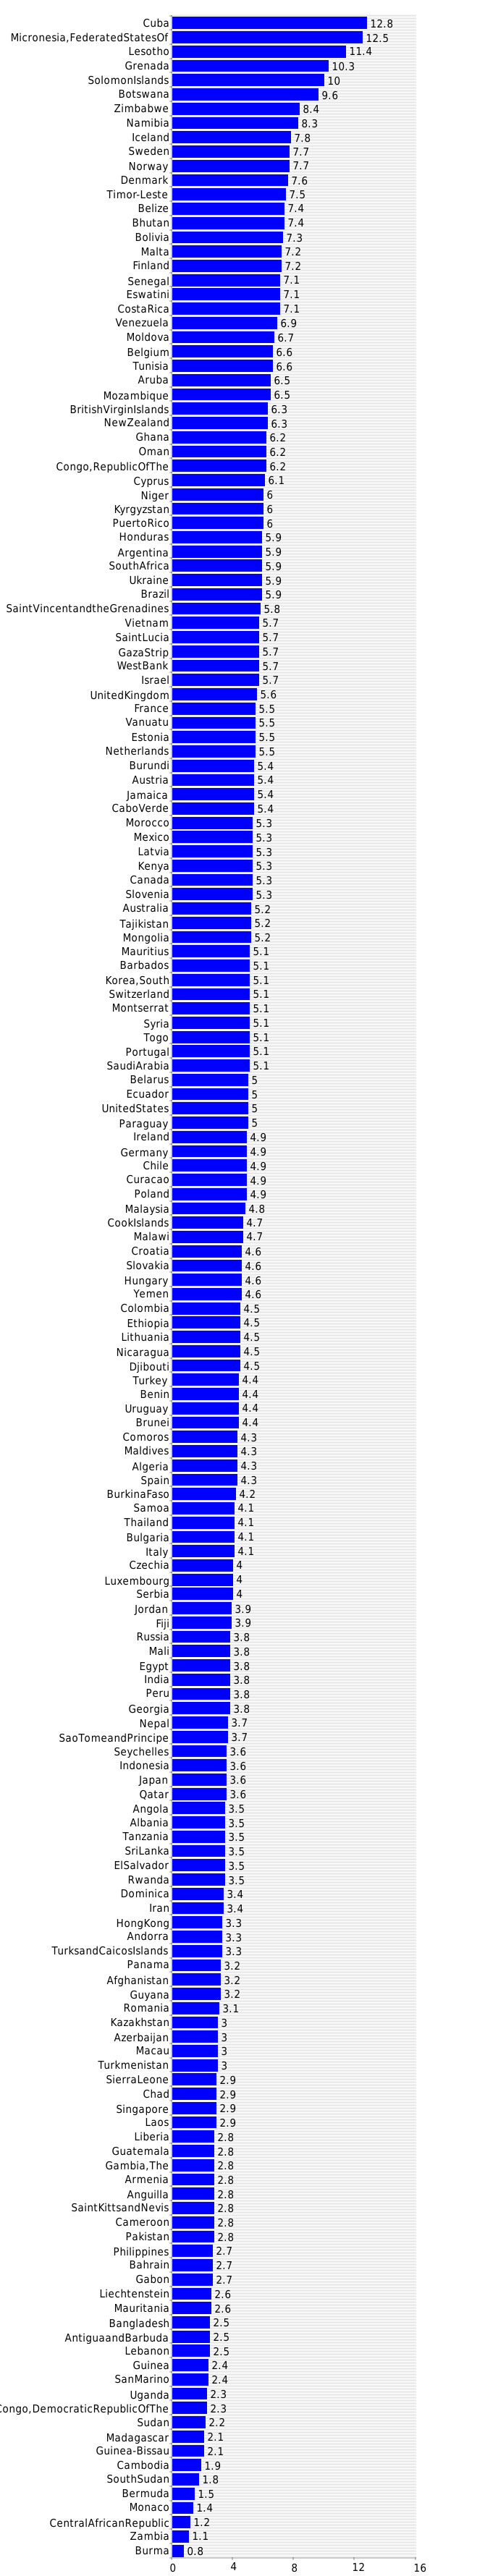  Education expenditures 2019 country comparisons, ranks, by Rank 